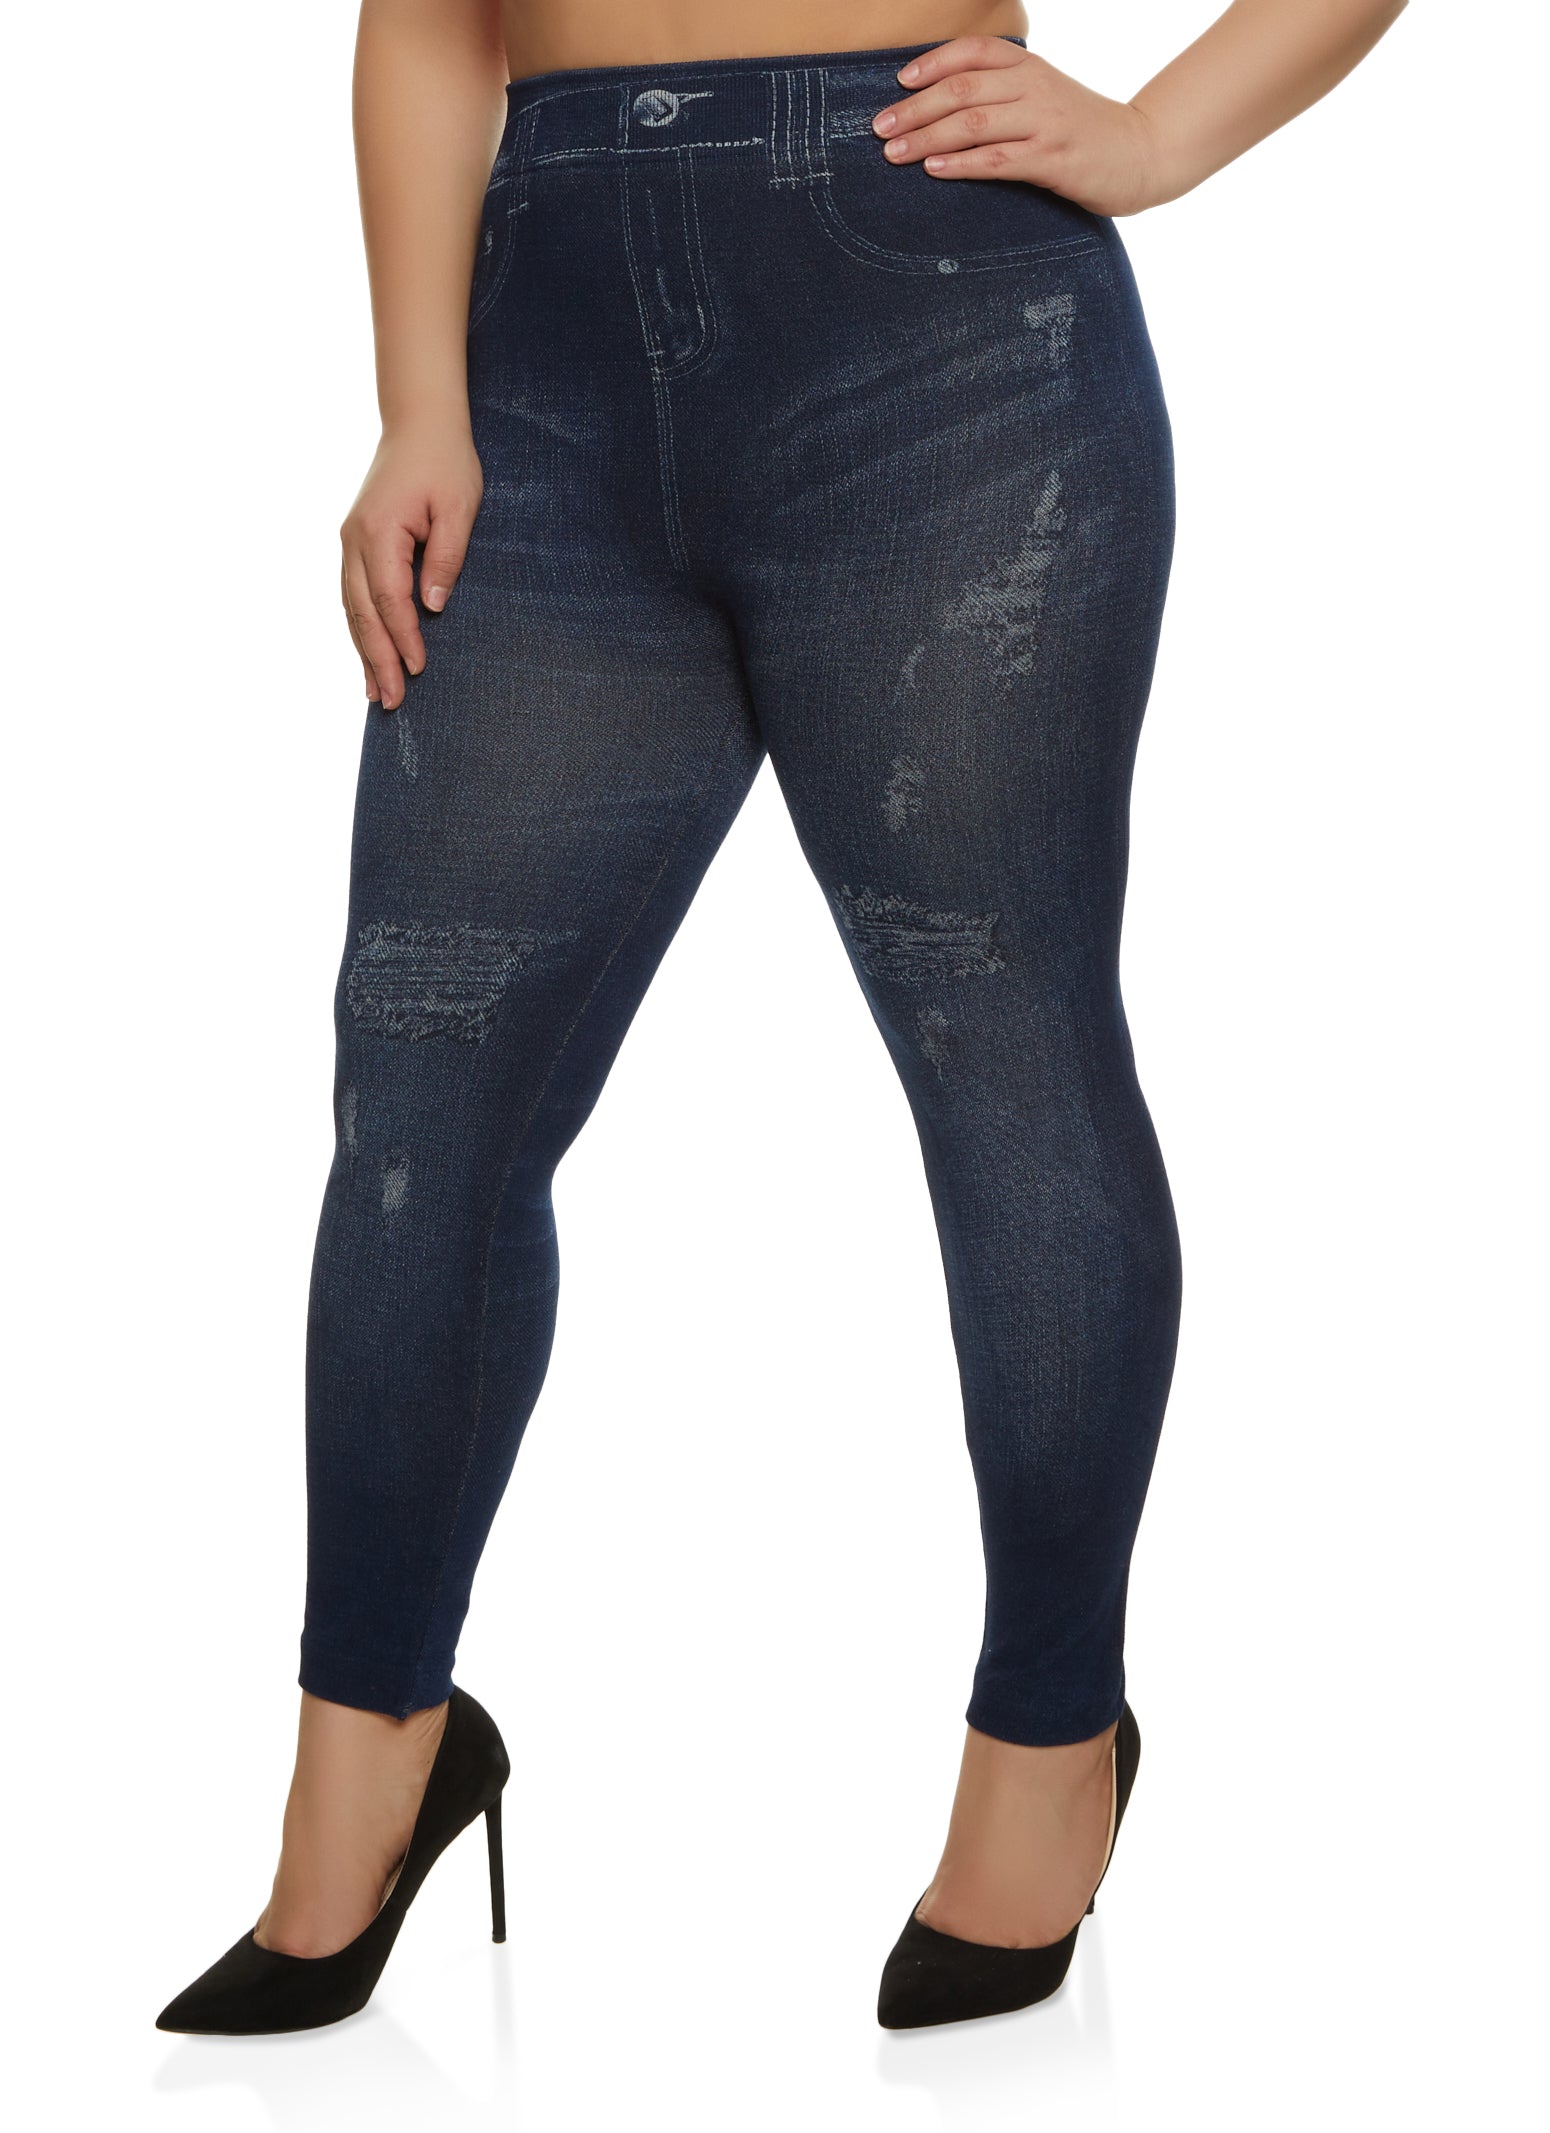 Plus Size Seamless Distressed Print Jeggings